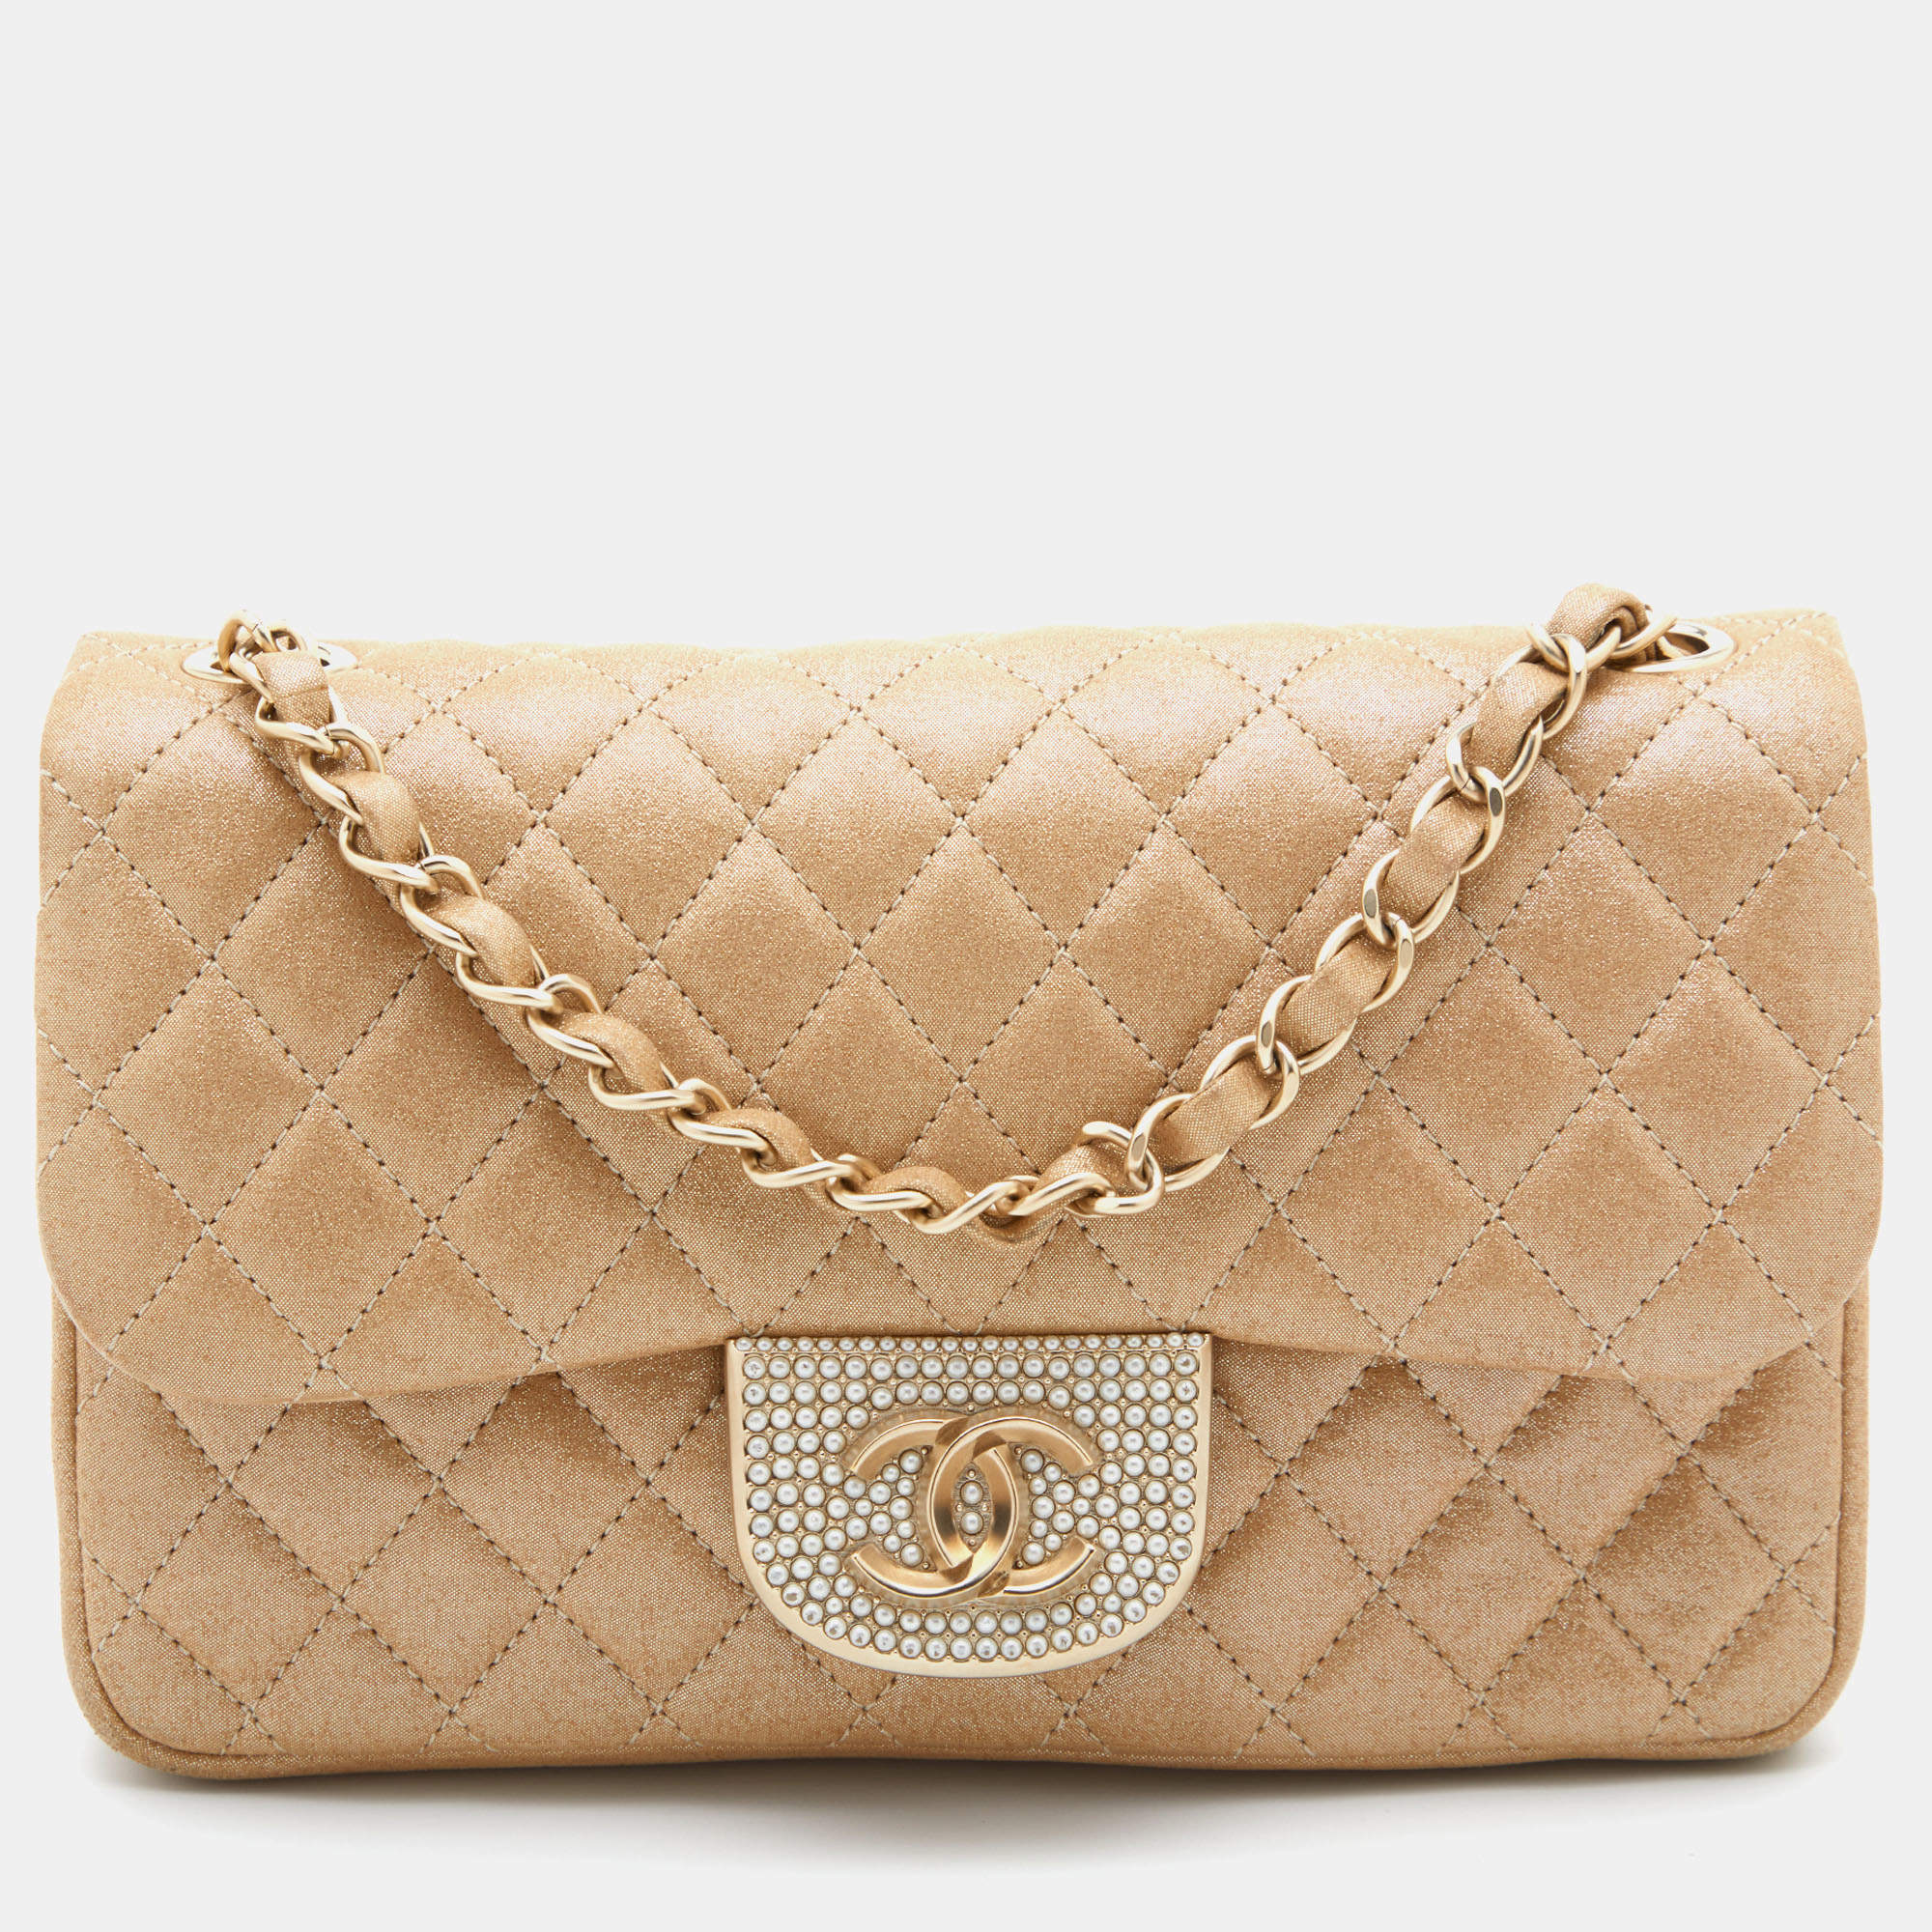 Sale* Auth New Chanel 2018 Gold Cc Crystal and 50 similar items